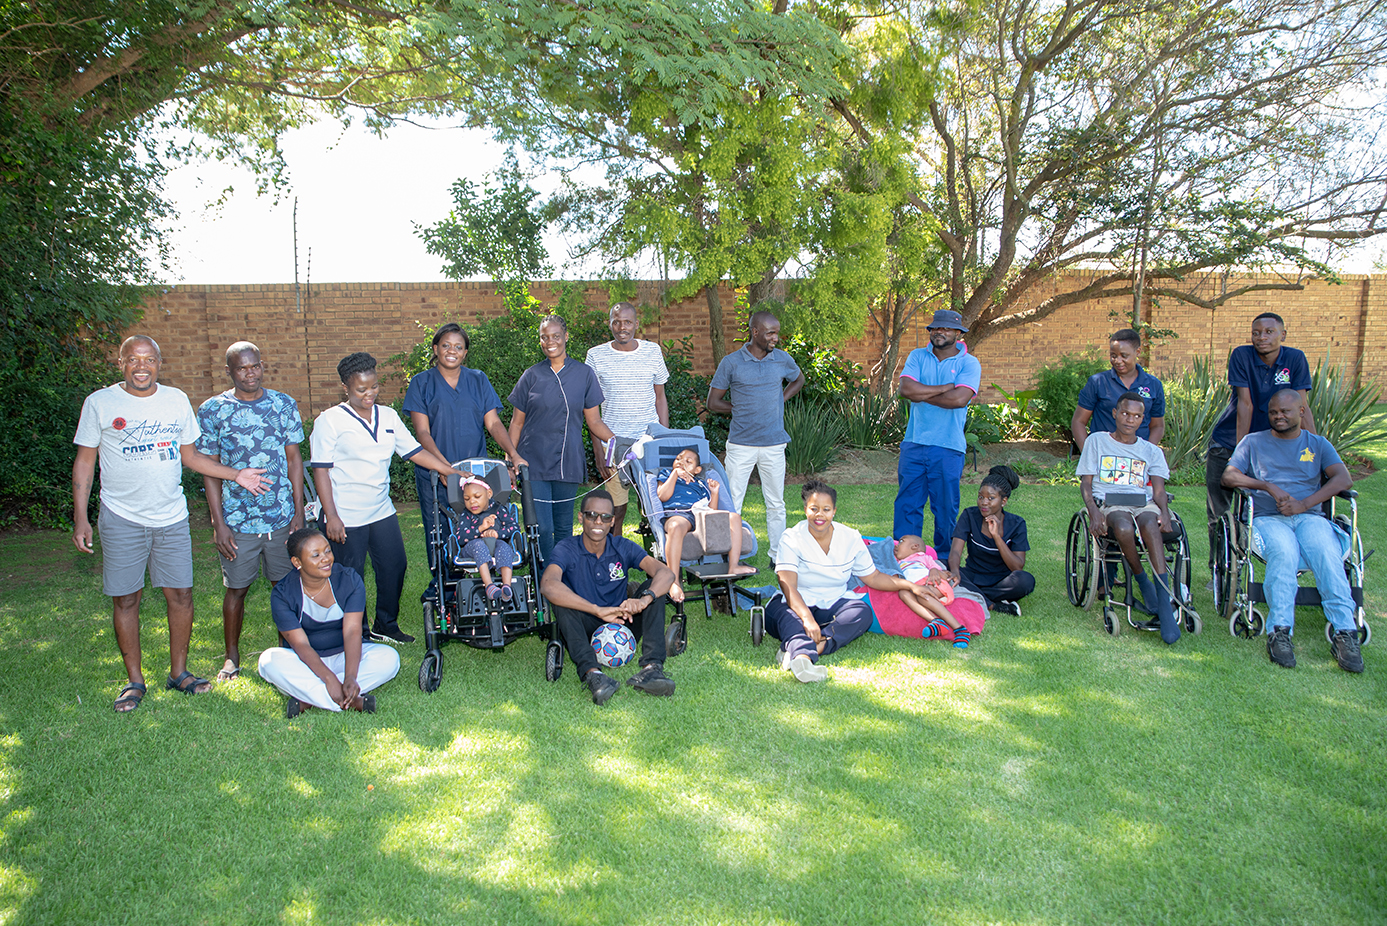 Our full team and residents enjoying the gardens